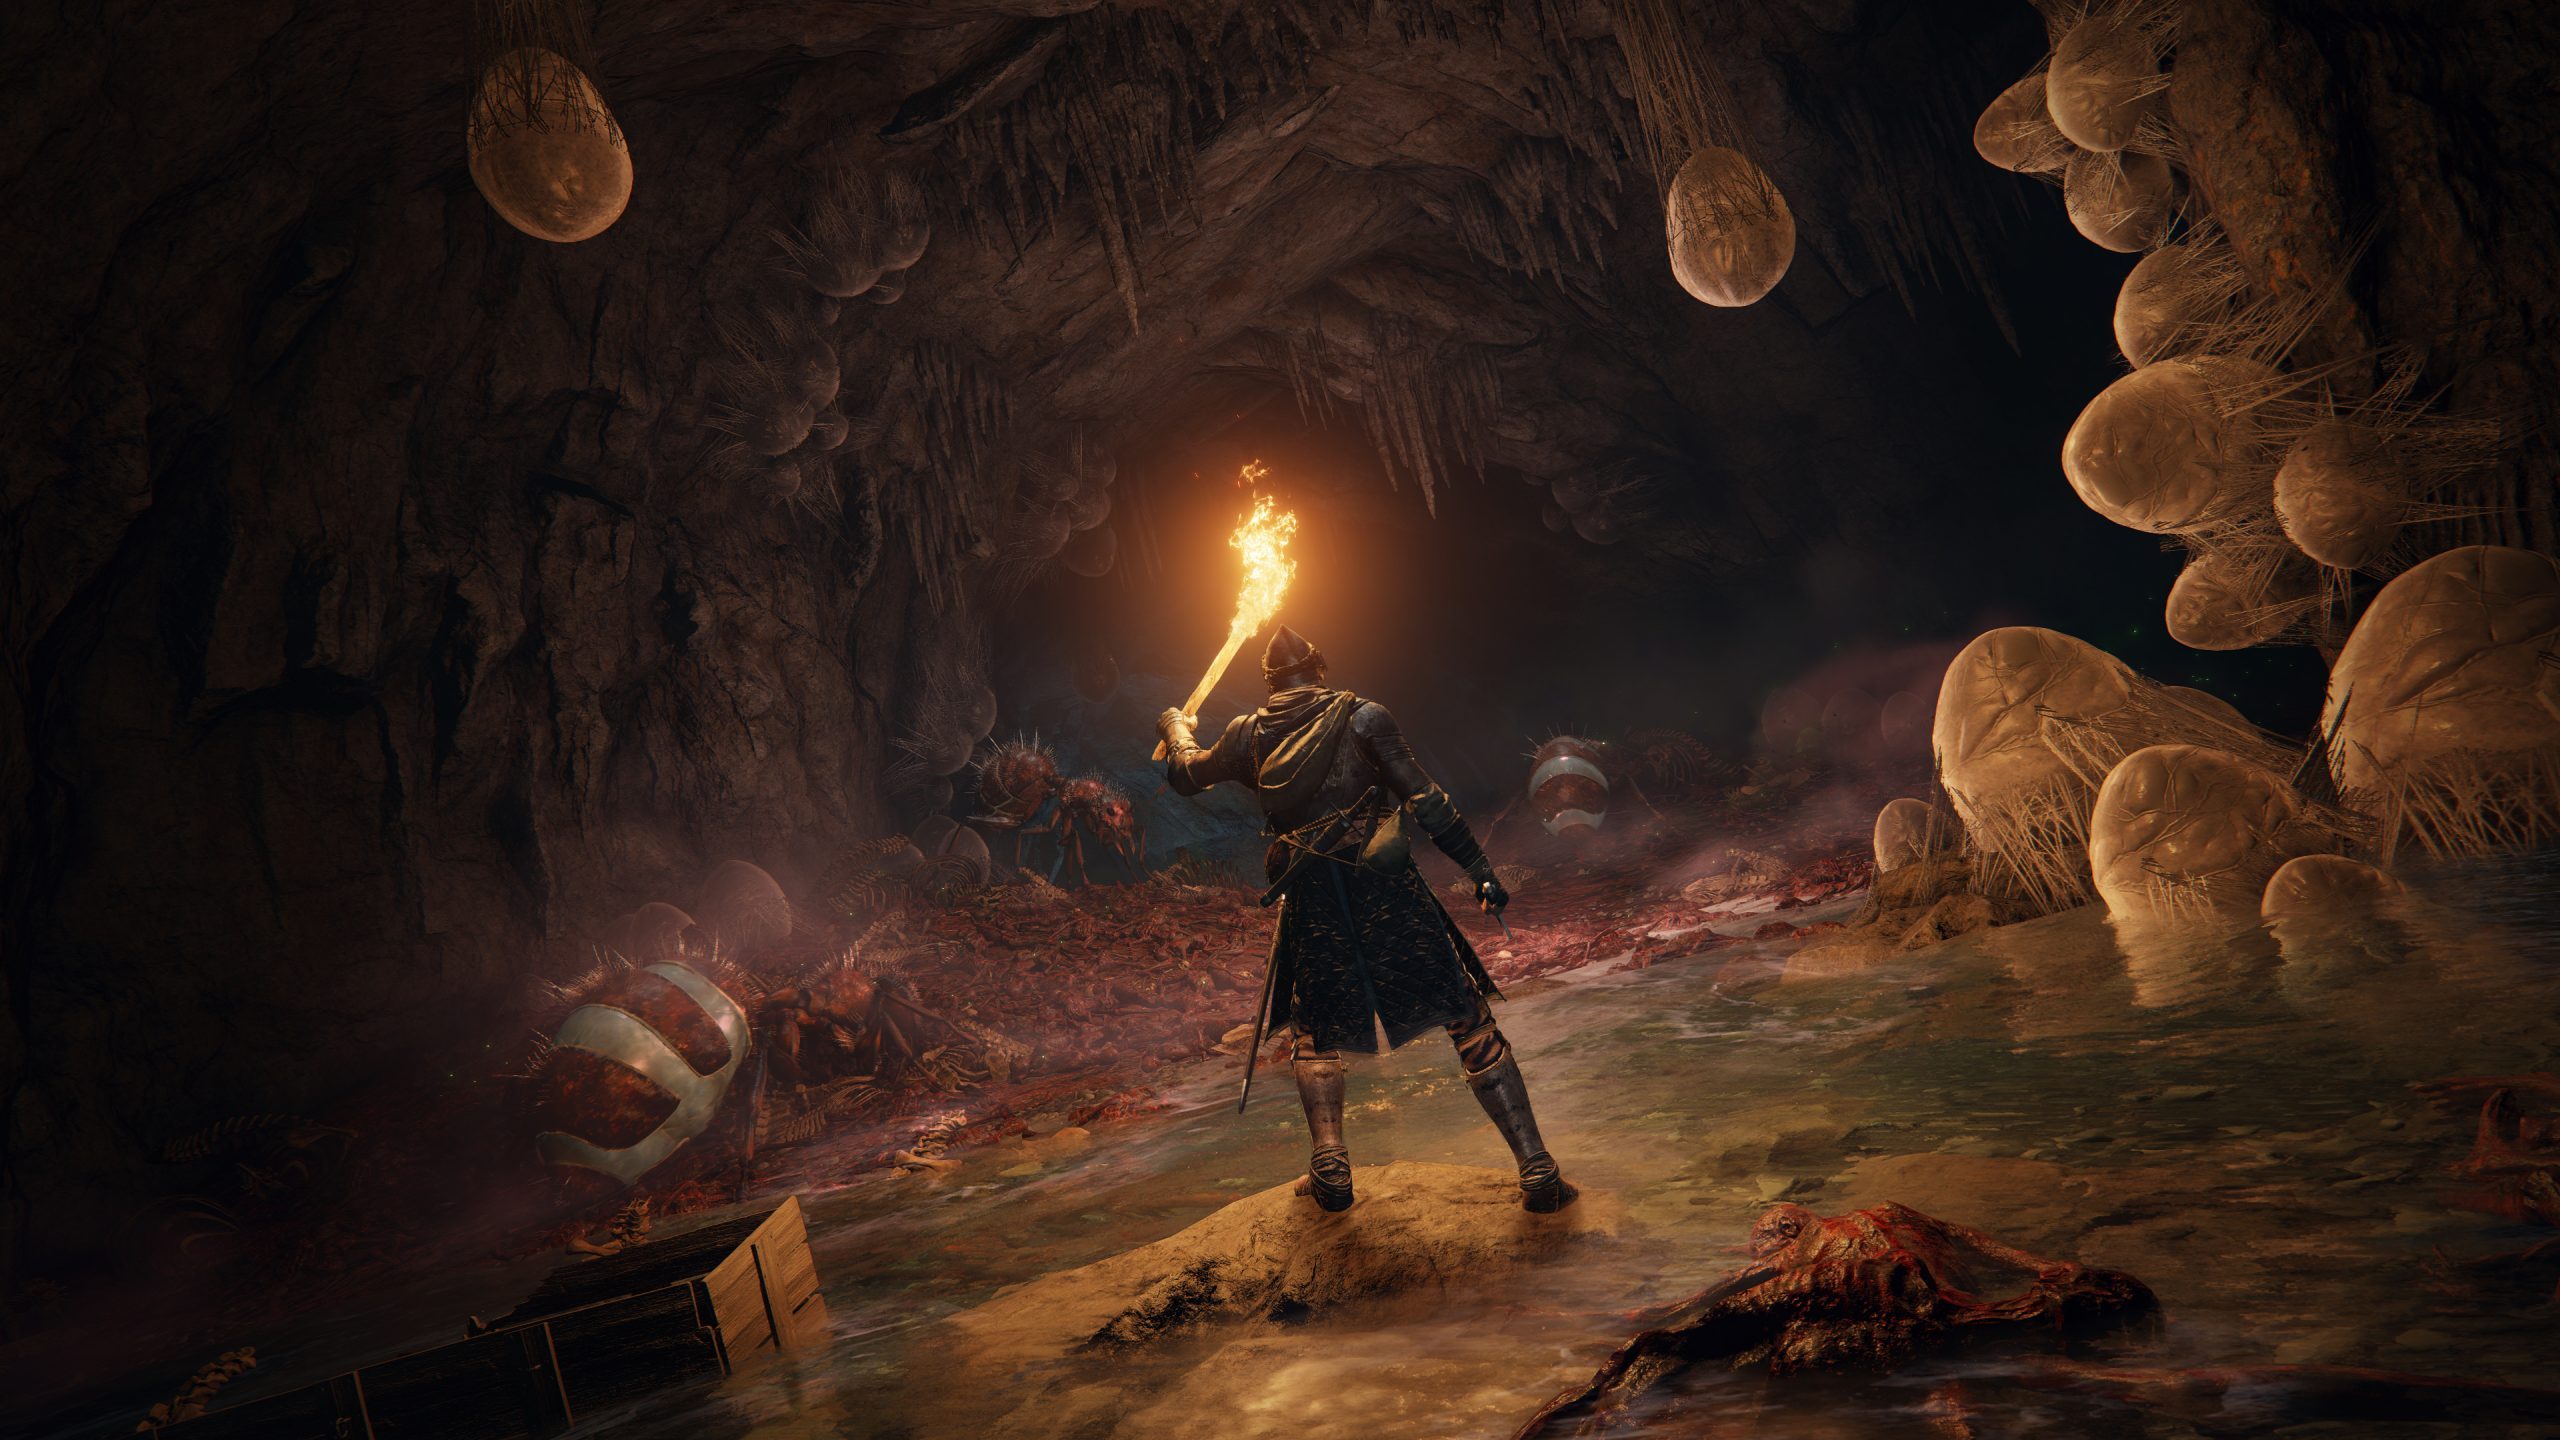 A still from the Elden Ring game showing a figure in a dark cave, holding aloft a burning torch for light